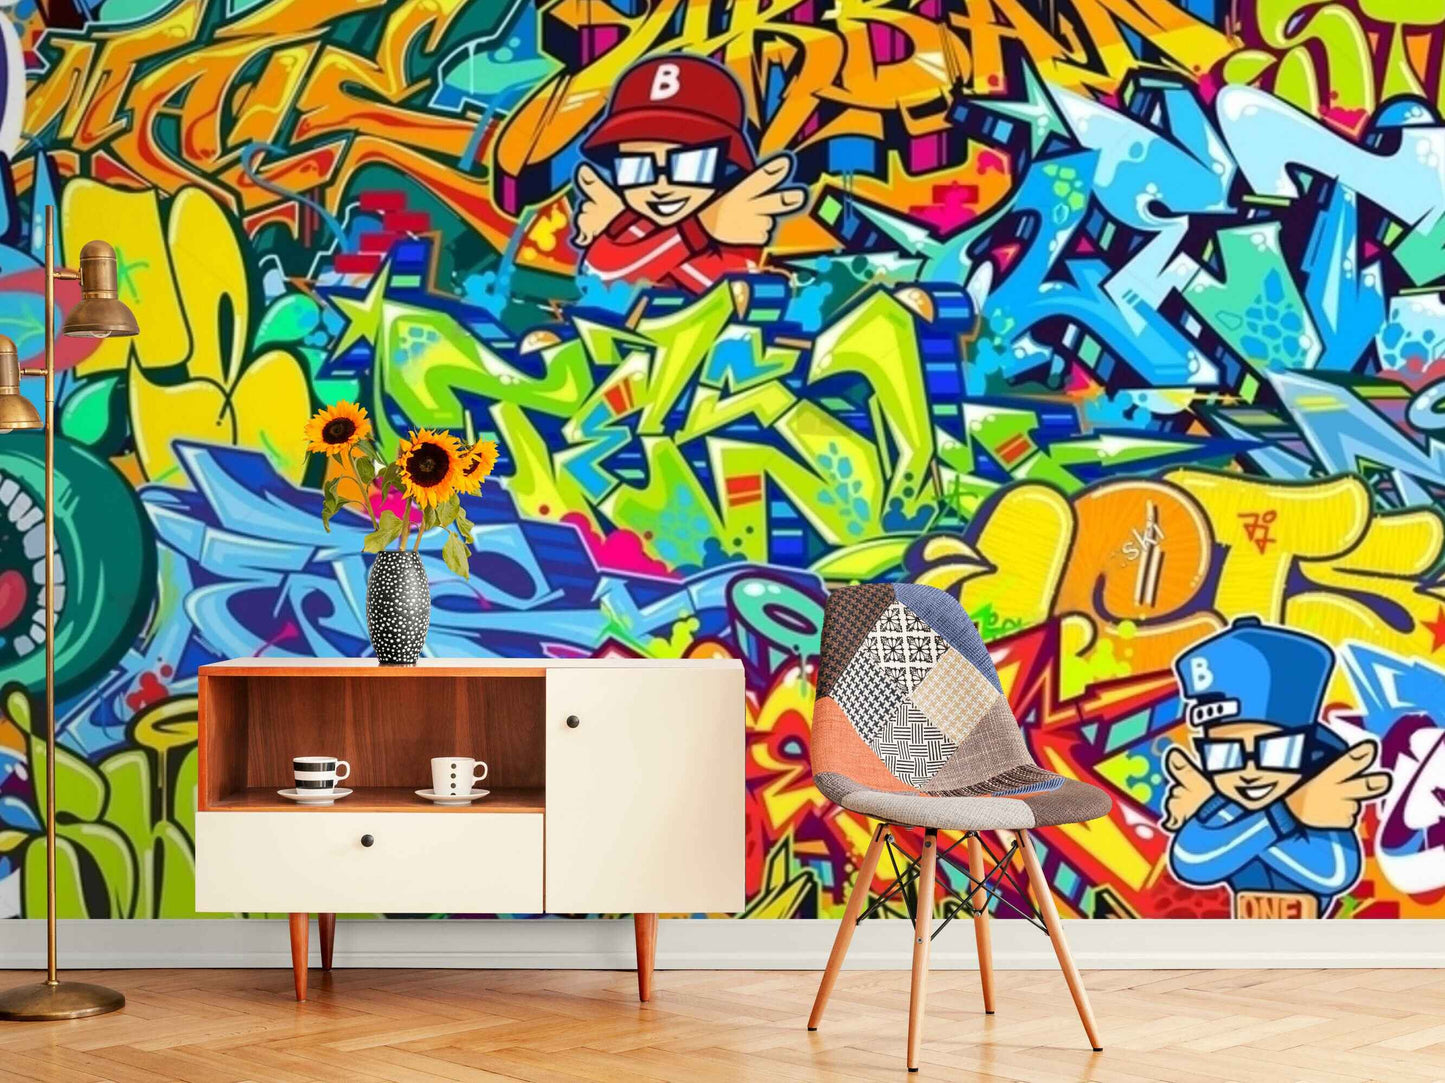 An image of a removable wallpaper with a graffiti design in various colors, including shades of blue, green, orange, and yellow. The design features a mixture of abstract shapes, lines, and splatters, creating a chaotic yet artistic effect. The wallpaper is easy to install and remove, making it a perfect choice for those who want to customize their walls without committing to a permanent solution.